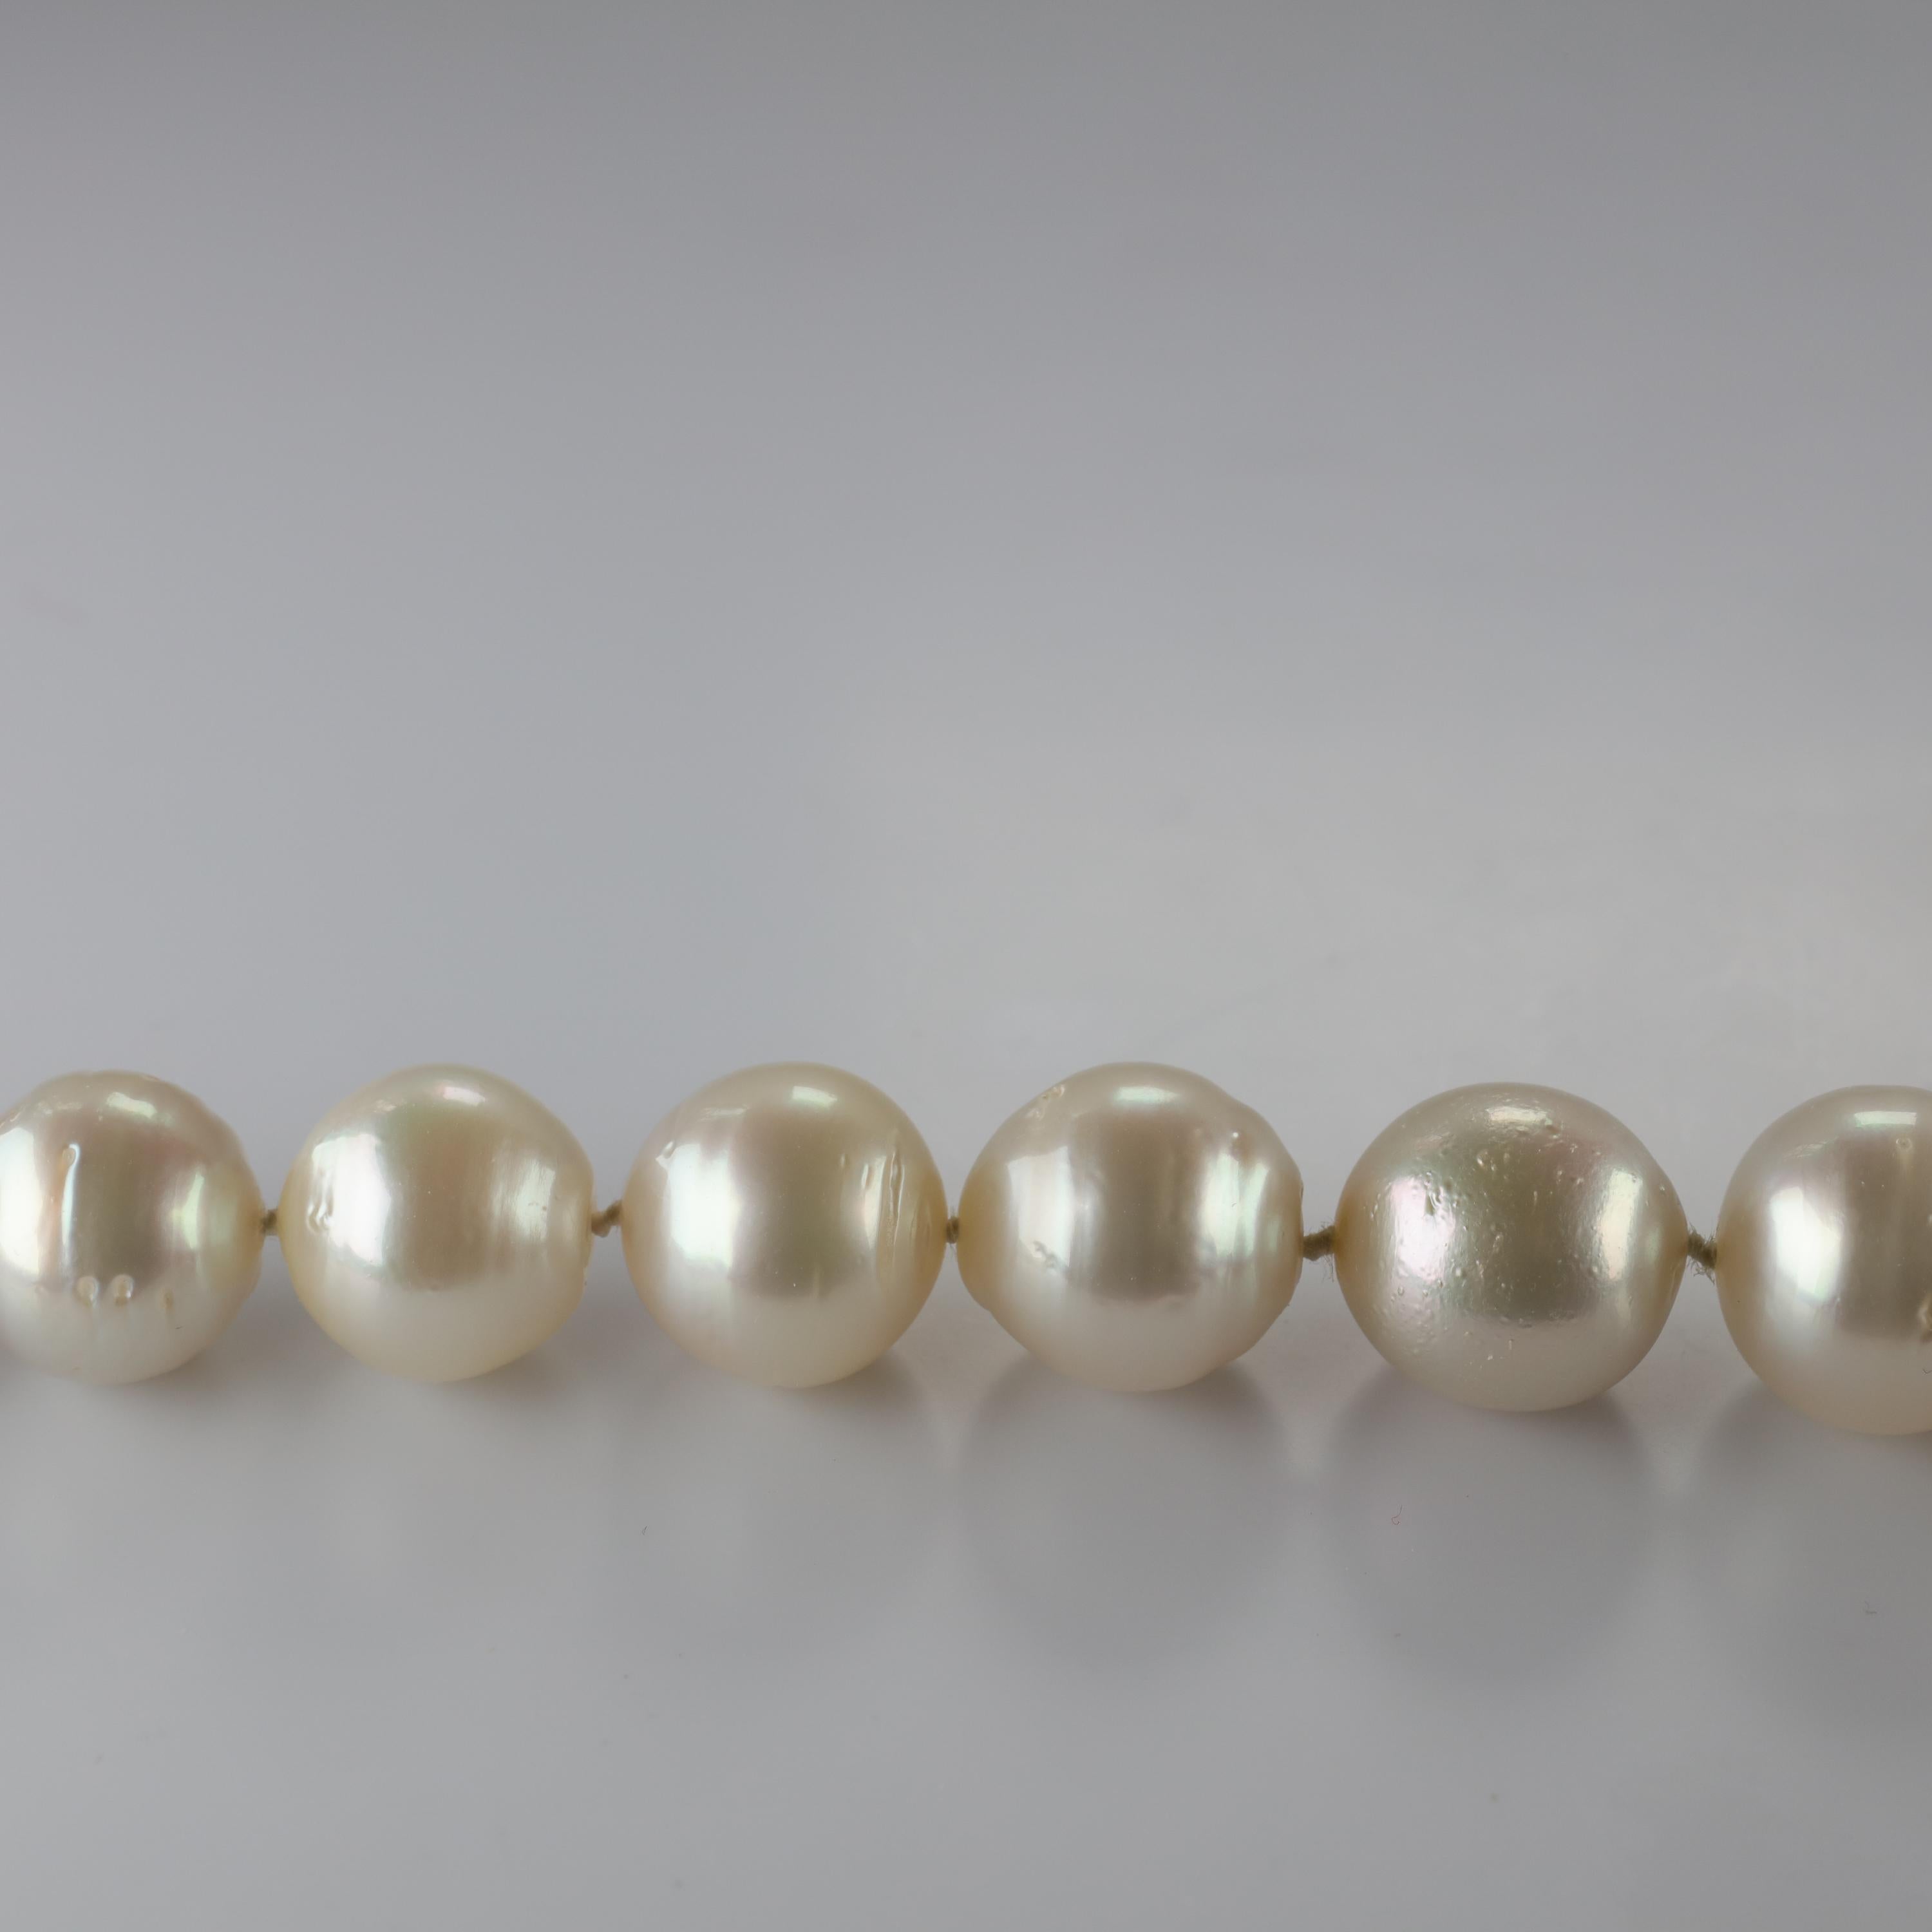 Women's or Men's South Sea Pearl Necklace Princess Length Large Pearls